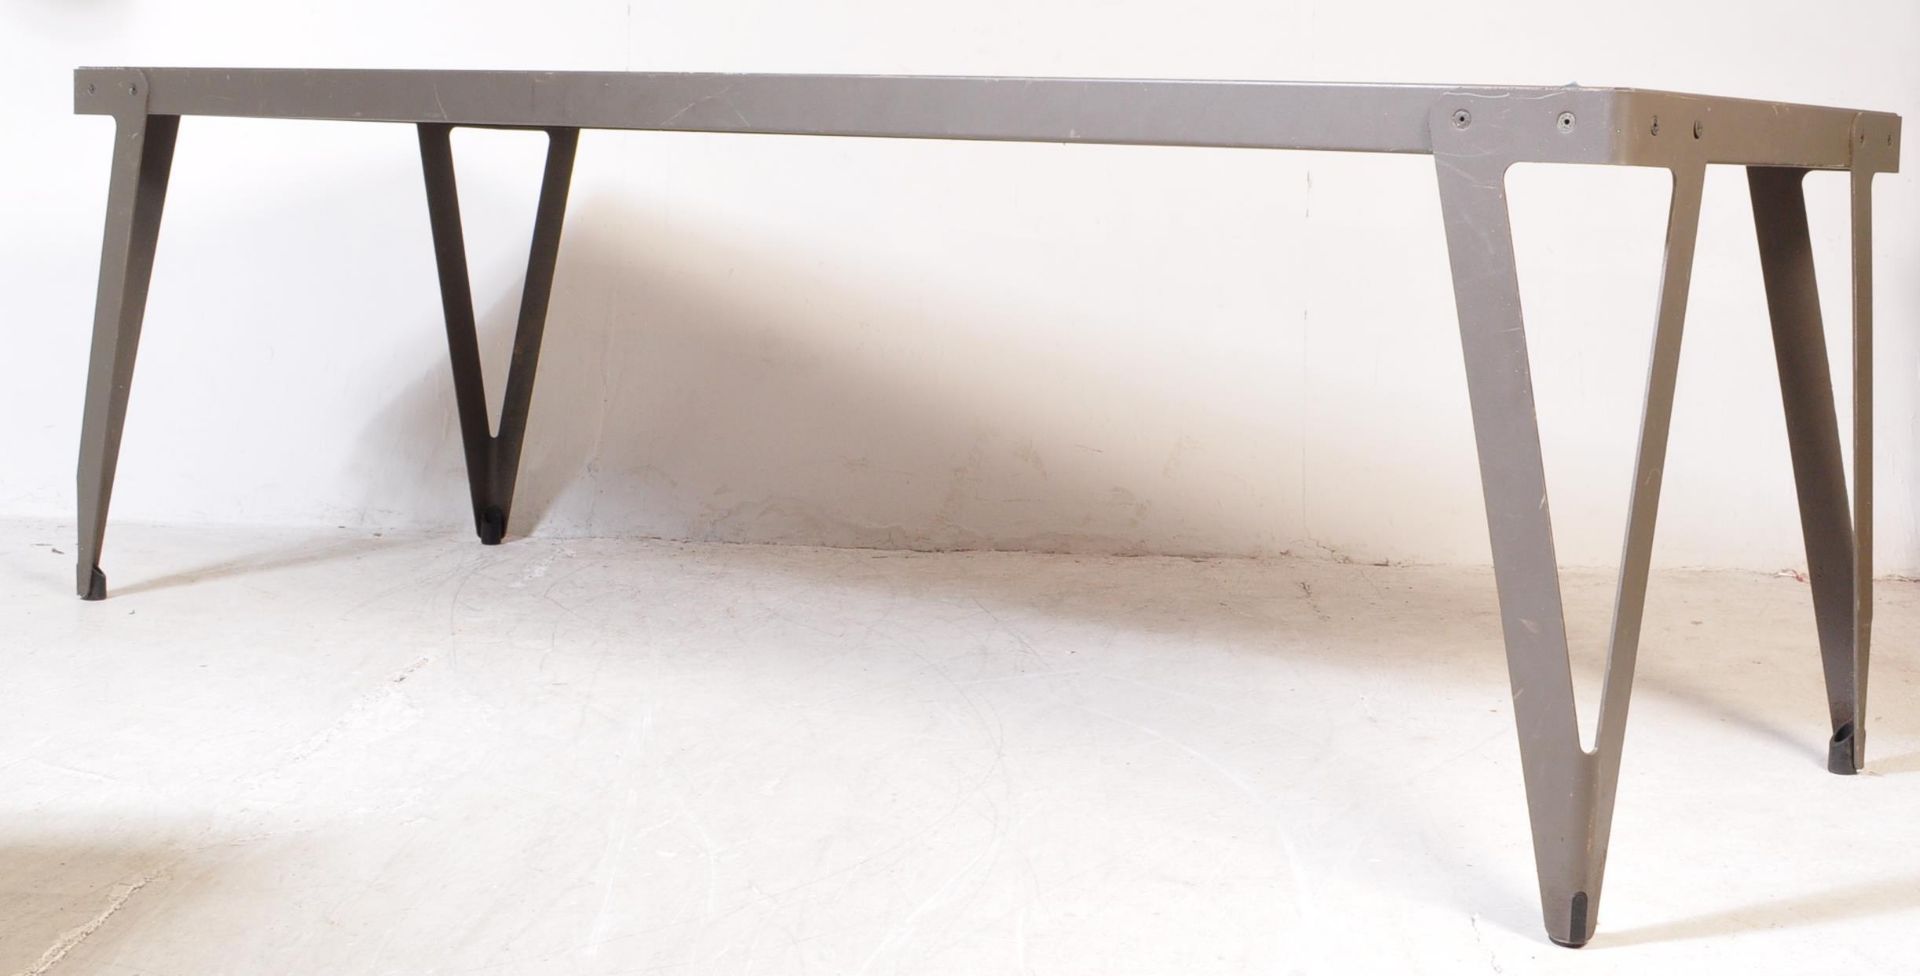 LARGE INDUSTRIAL STYLE METAL DINING TABLE